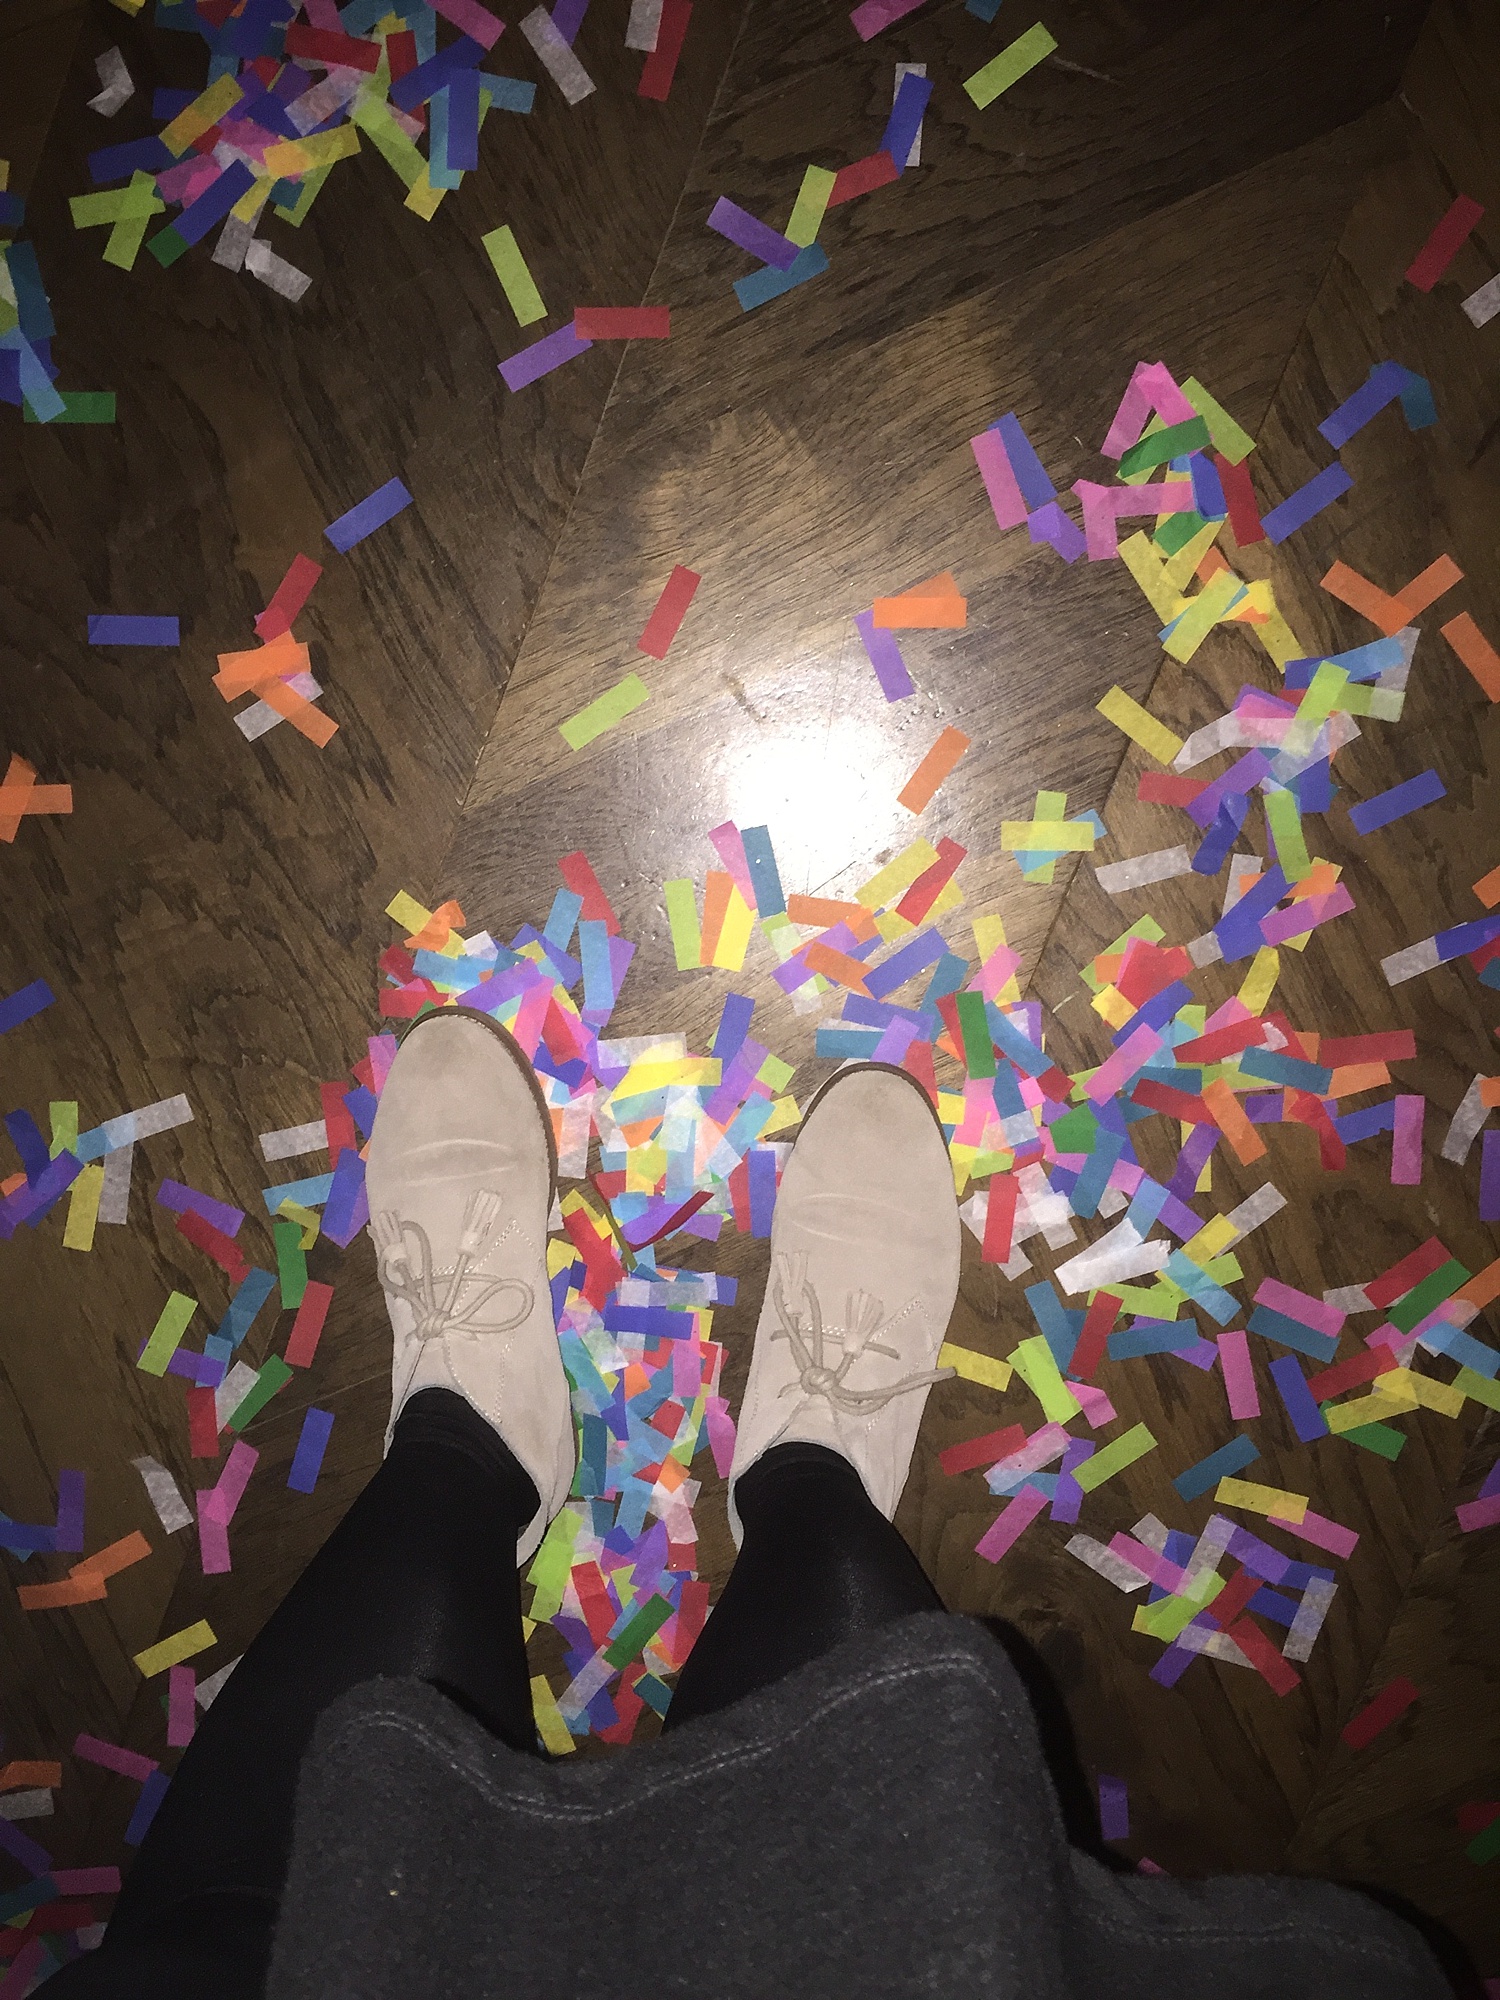  We did an awesome wedding on New Years Eve and the couple had everyone shoot confetti at midnight. It made for an incredible shot, and a very colorful floor afterwards. 